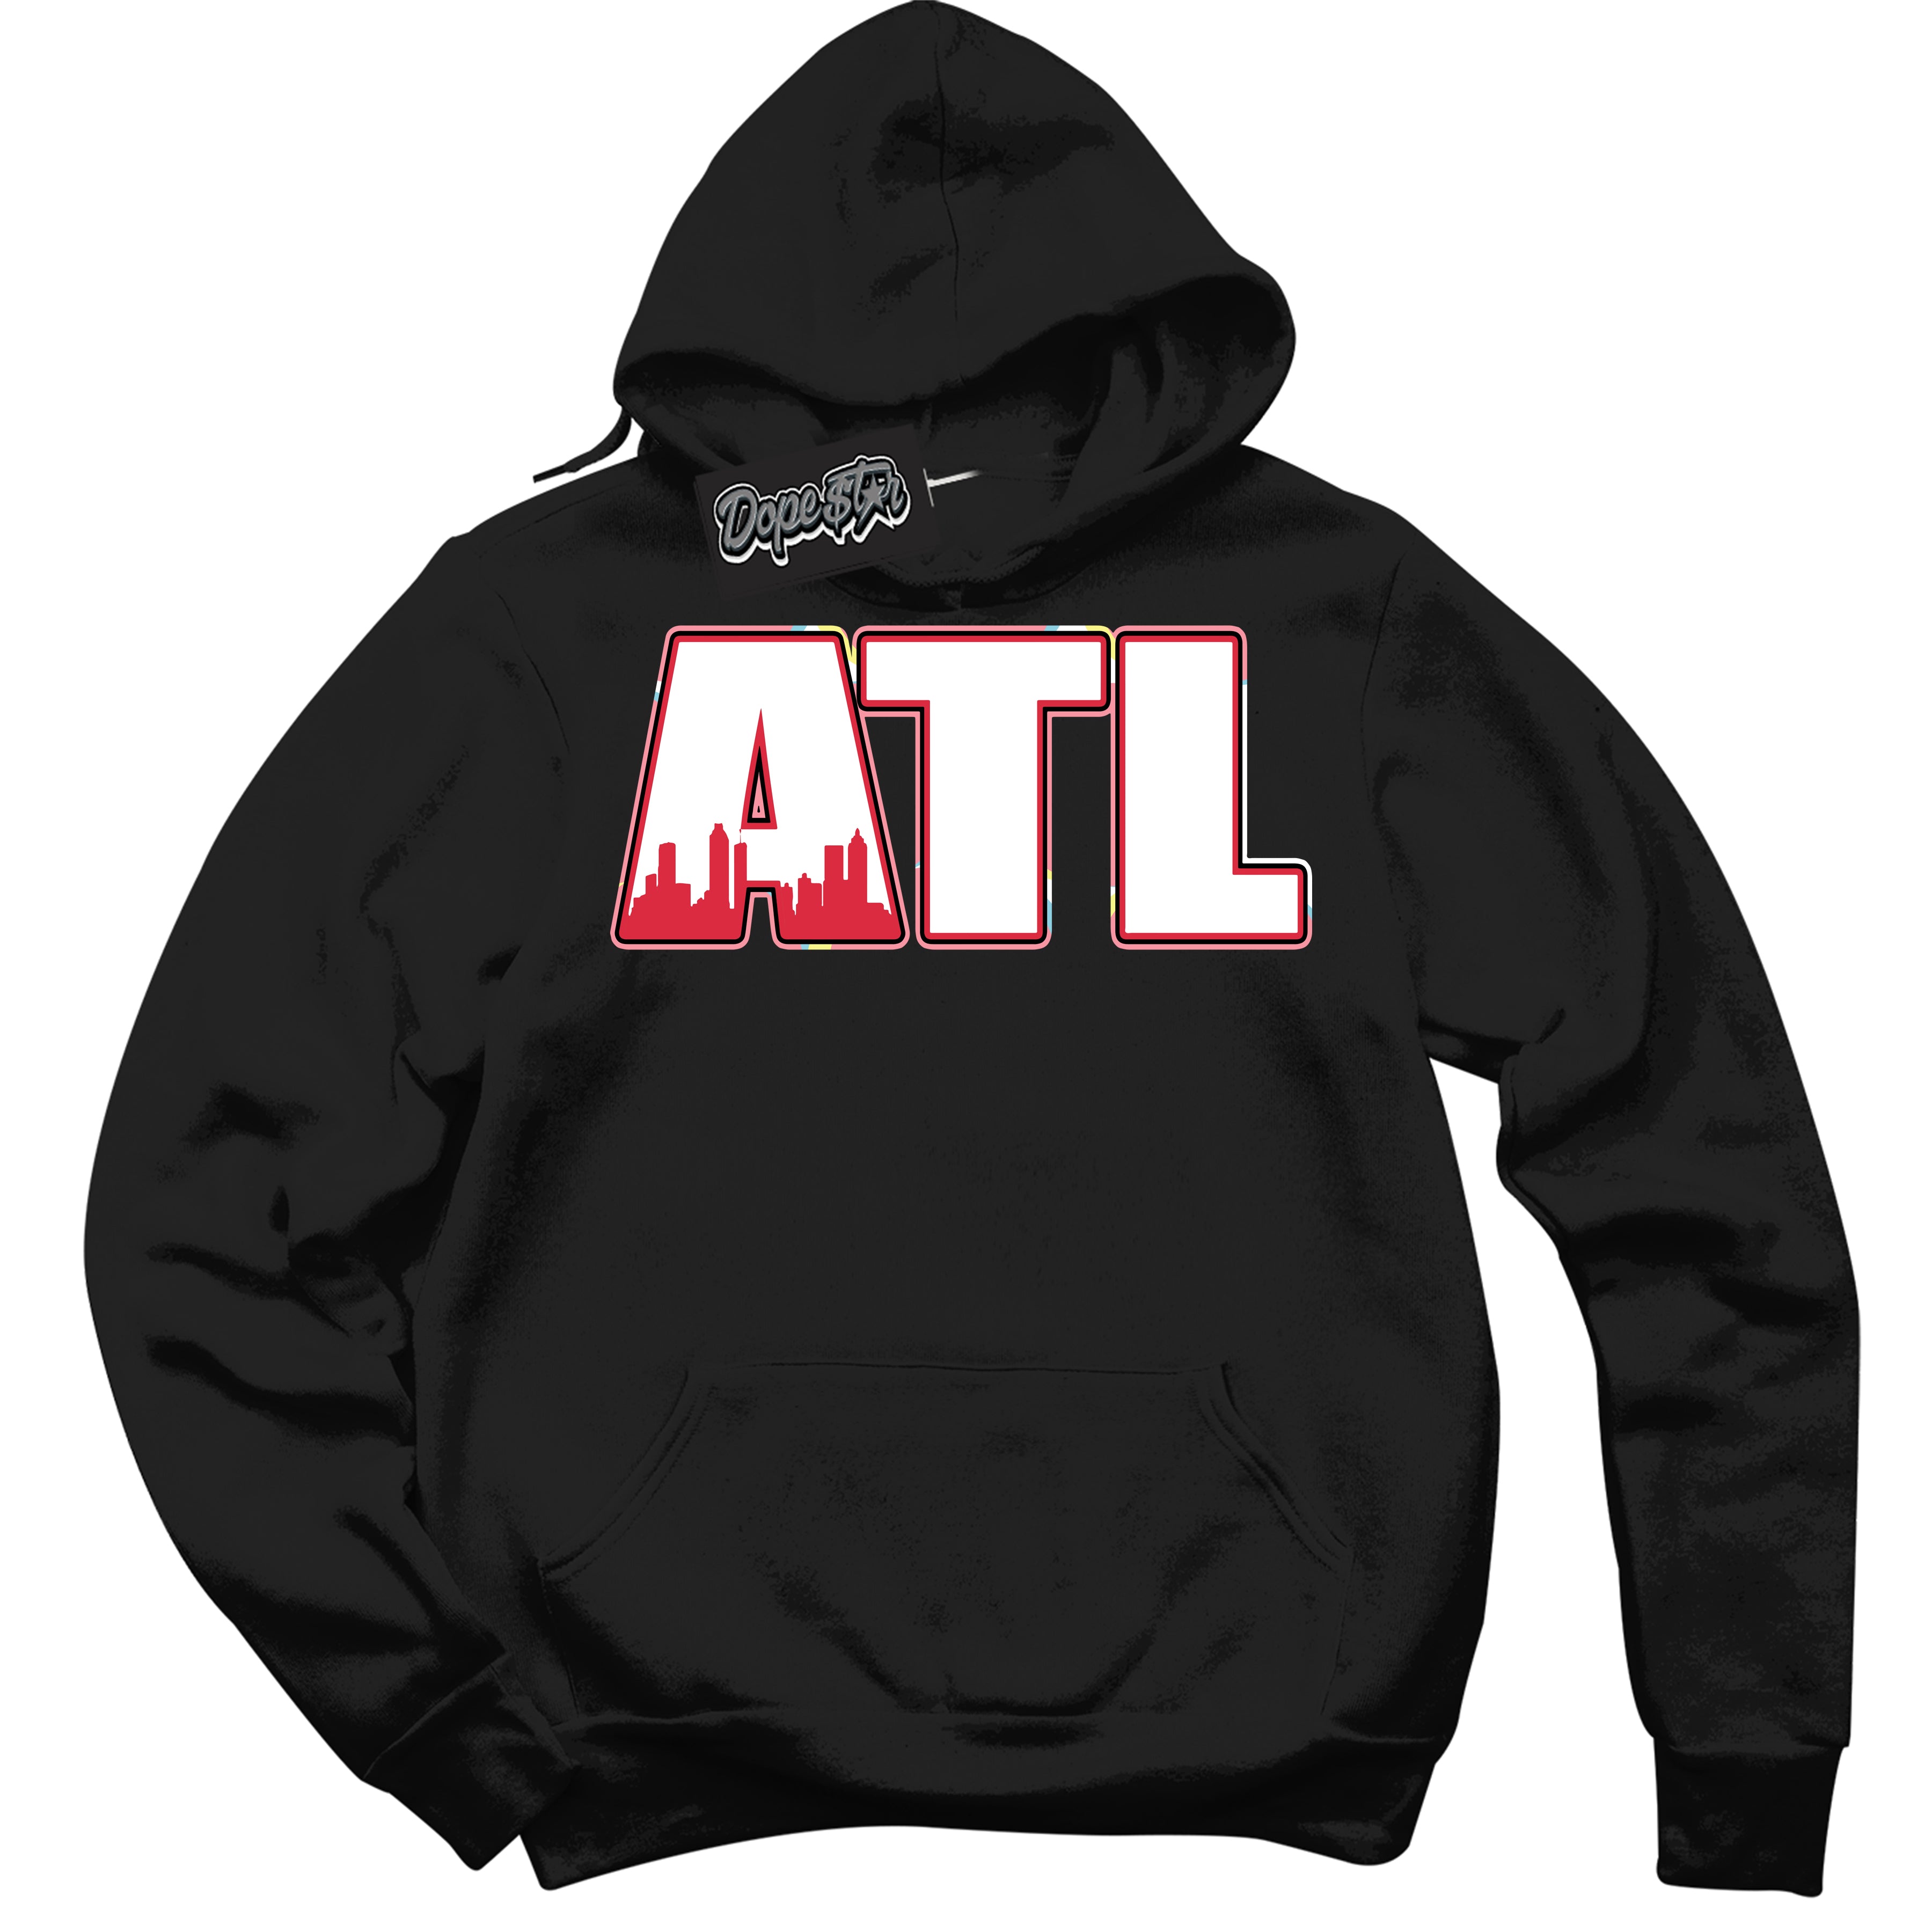 Cool Black Graphic DopeStar Hoodie with “ Atlanta “ print, that perfectly matches Spider-Verse 1s sneakers